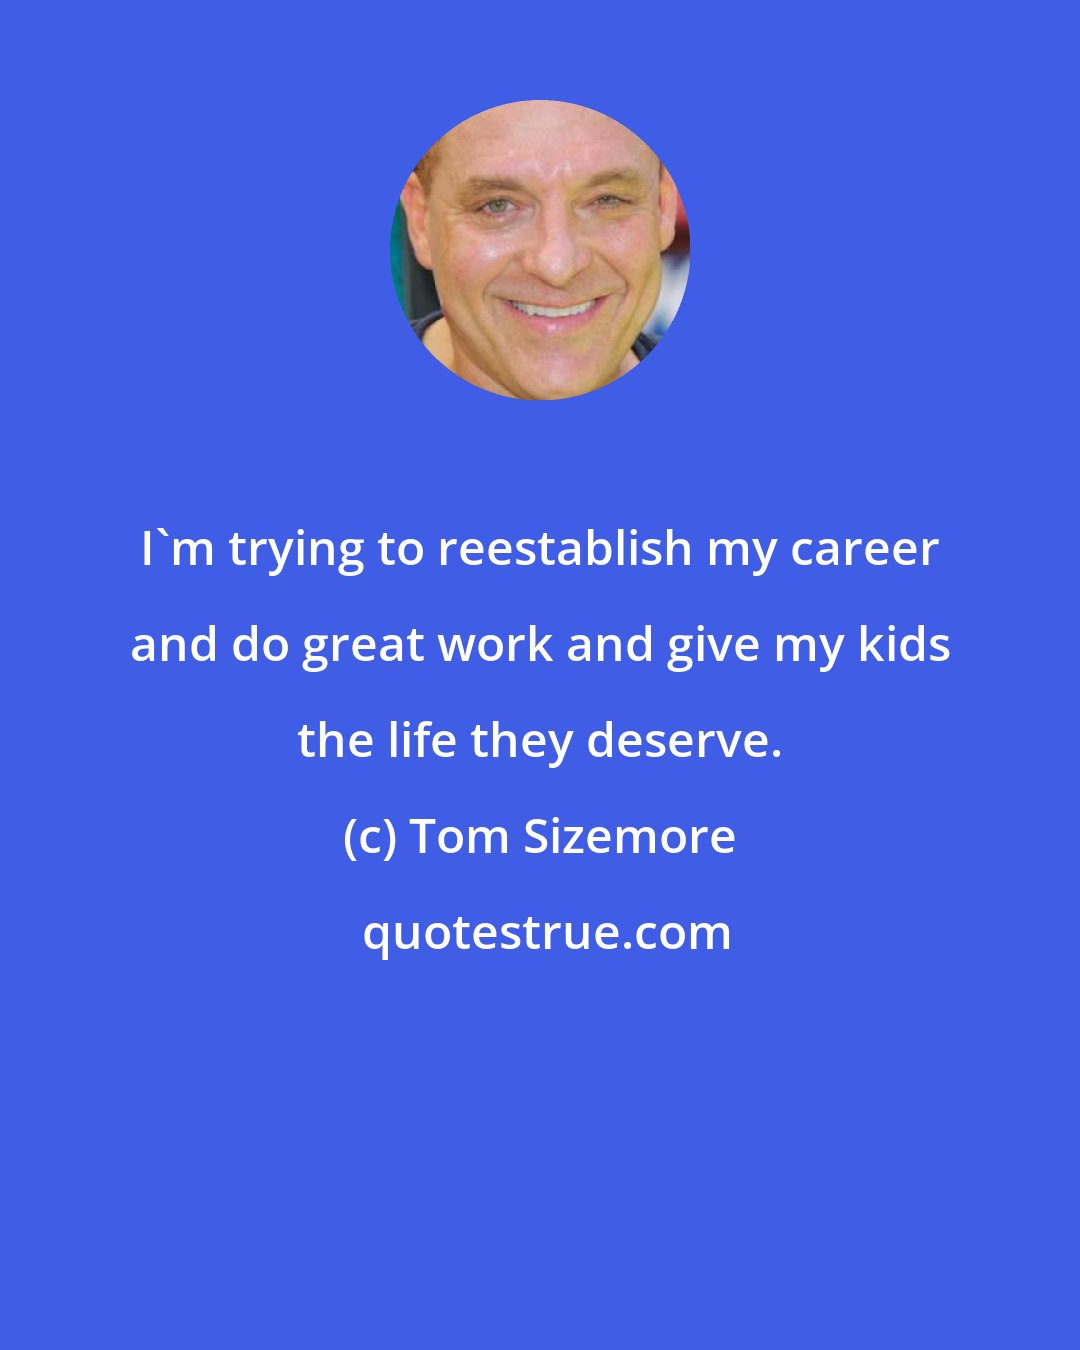 Tom Sizemore: I'm trying to reestablish my career and do great work and give my kids the life they deserve.